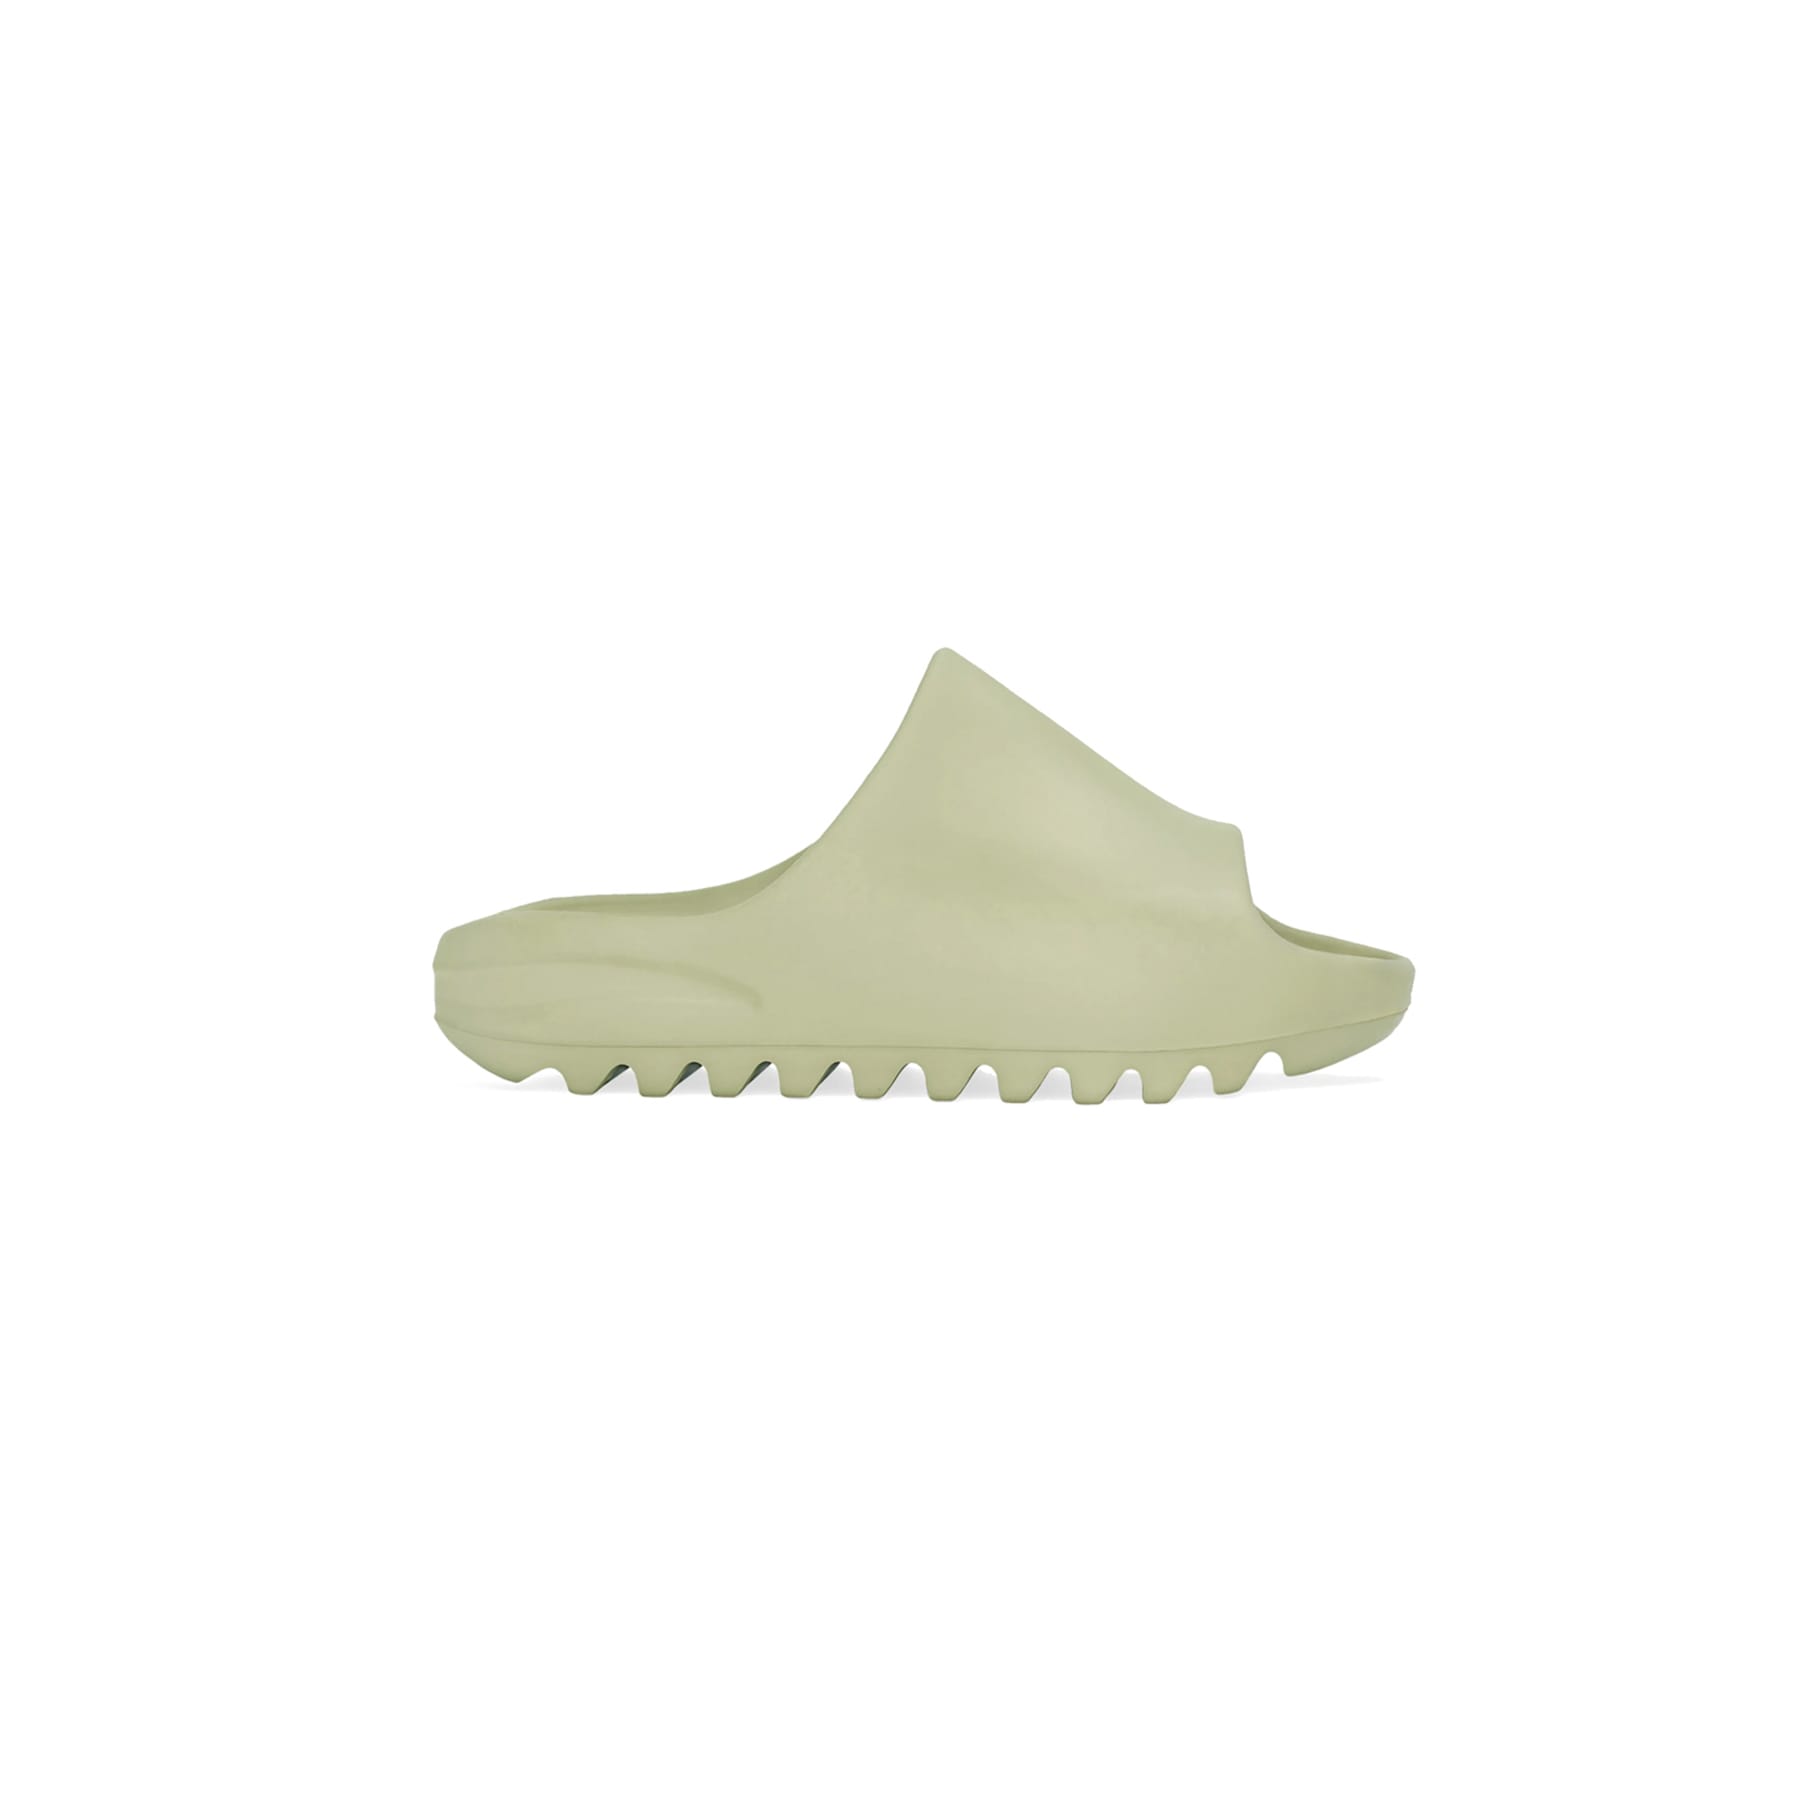 YEEZY Slide .Resin. Register Now on END. Launches